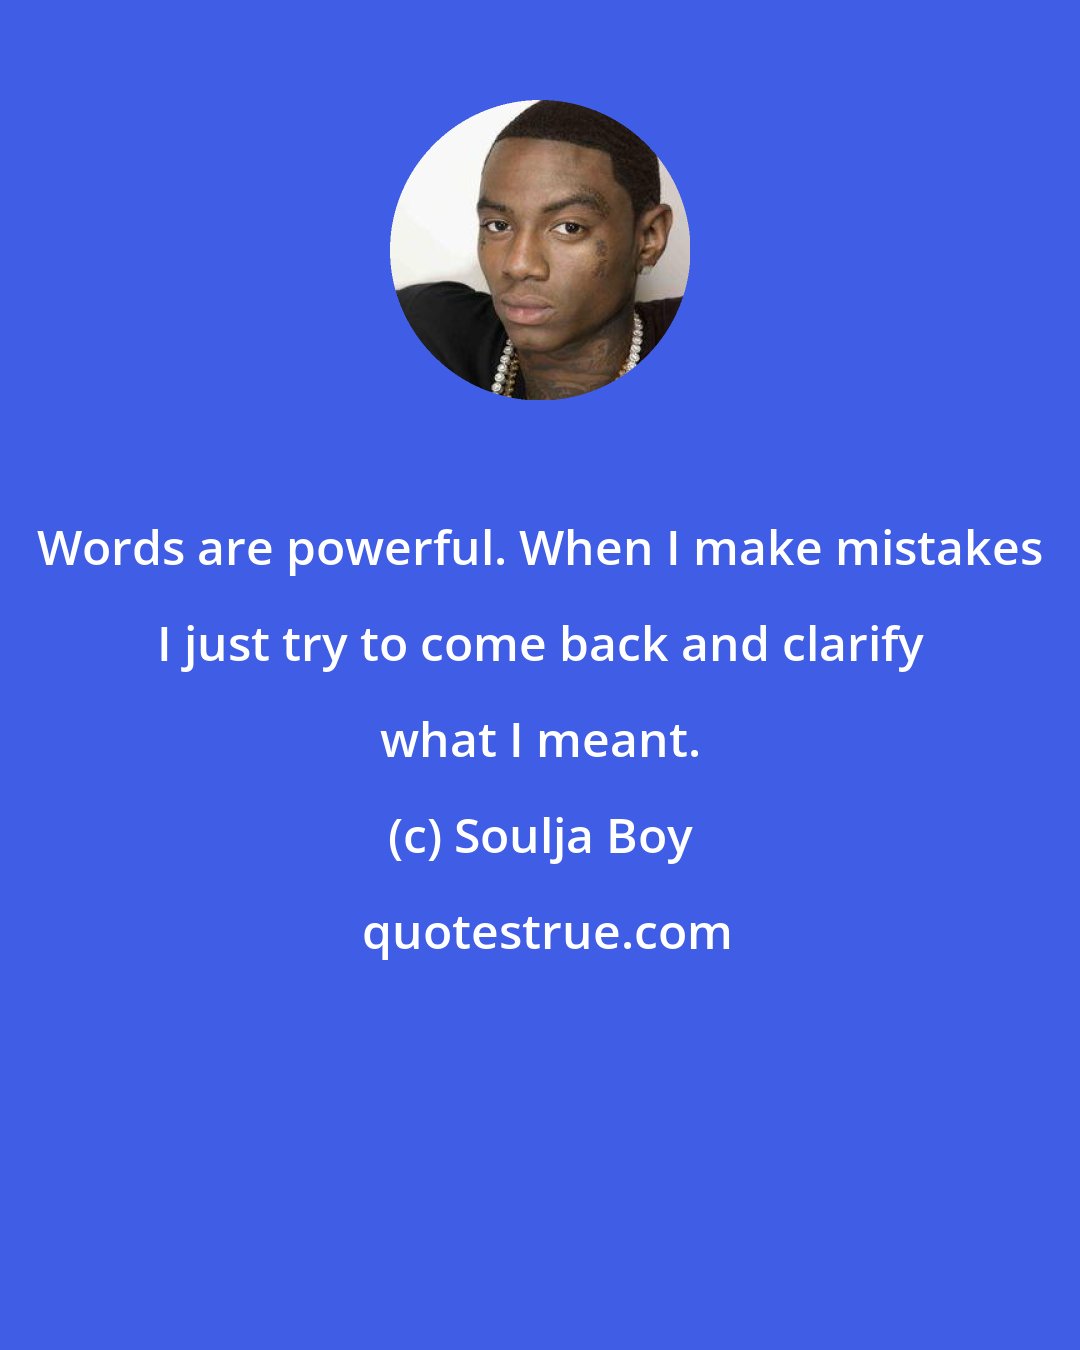 Soulja Boy: Words are powerful. When I make mistakes I just try to come back and clarify what I meant.